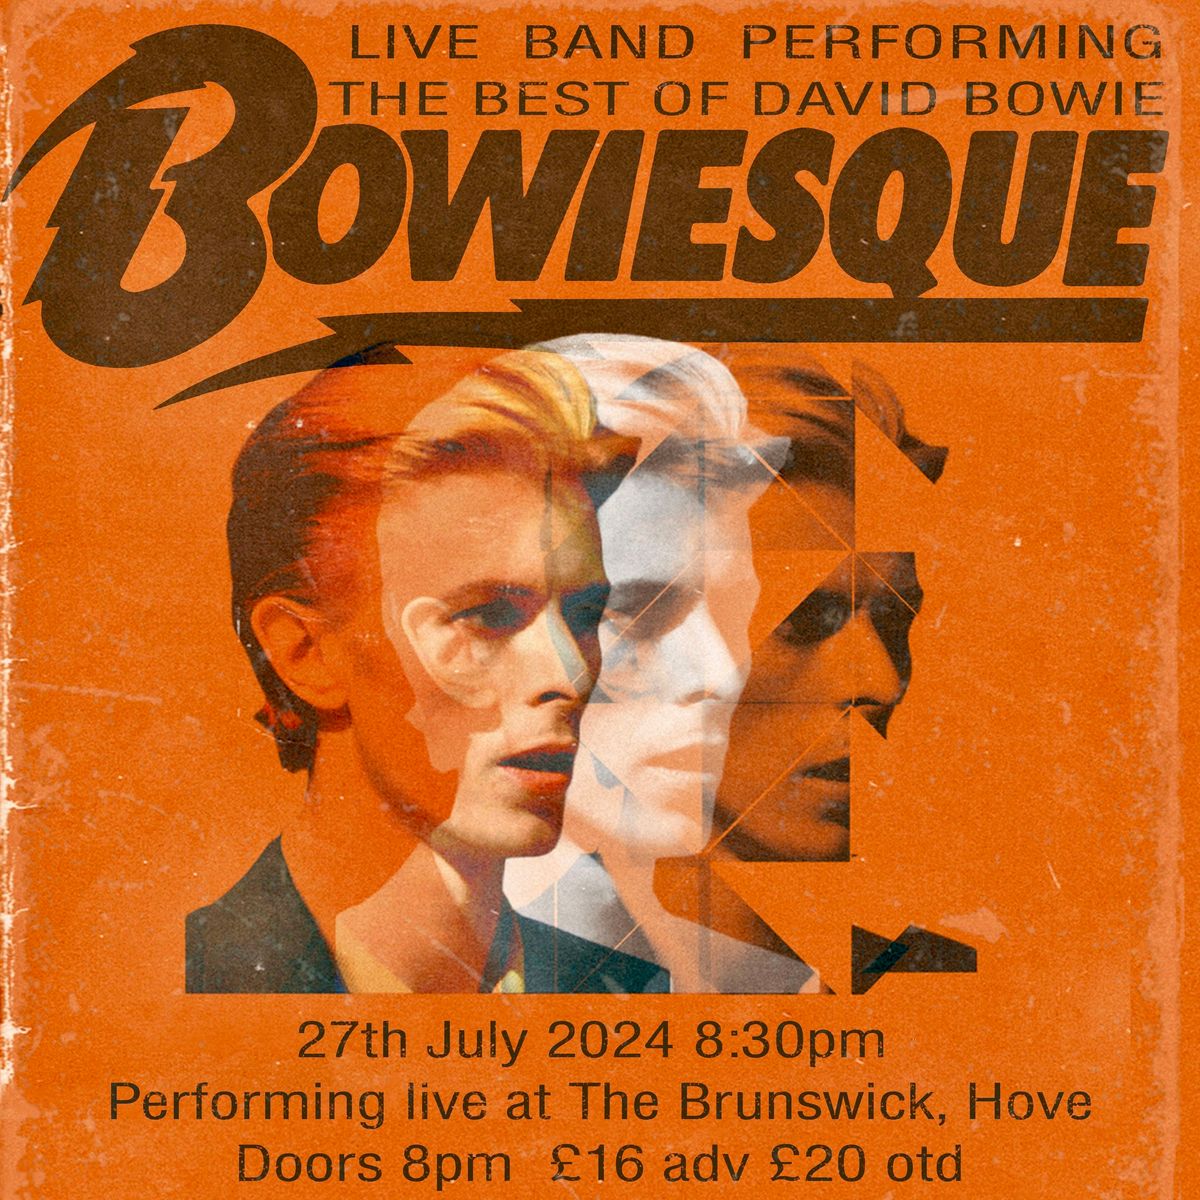 Bowiesque - The Brunswick Hove